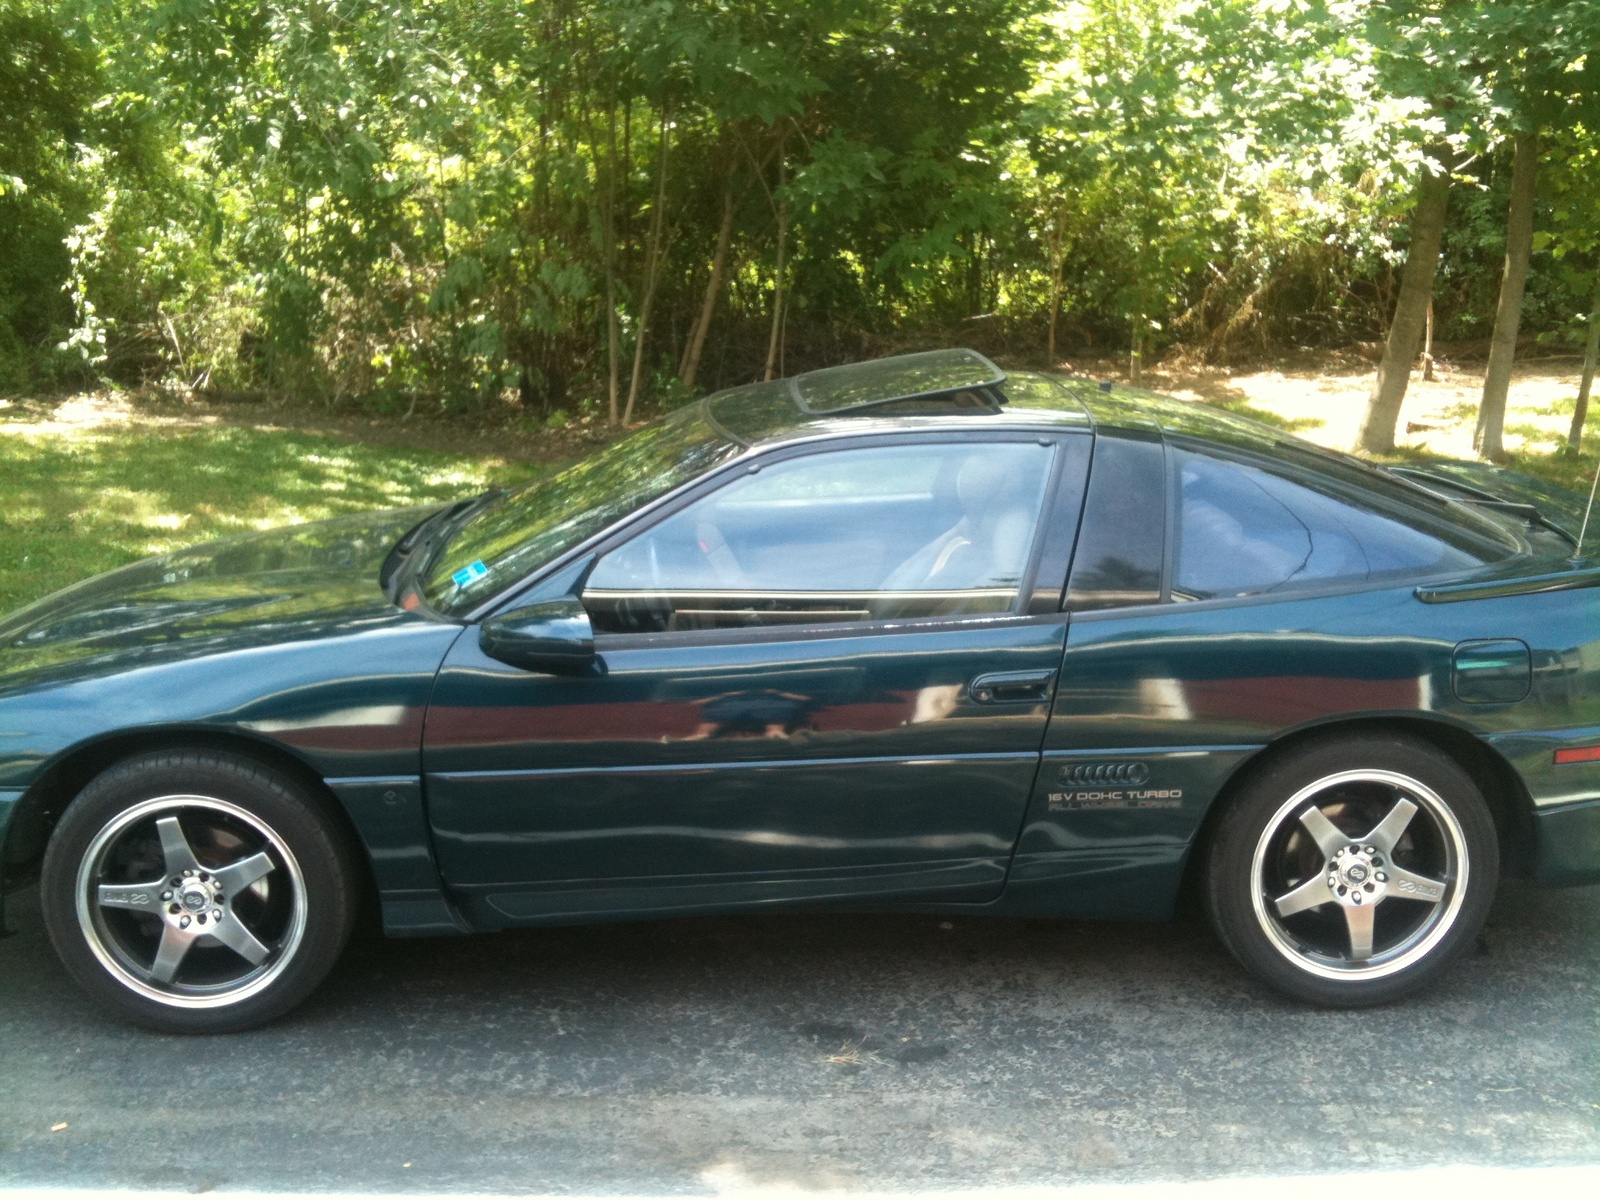 1993 Eagle Talon 2 Dr TSi Turbo AWD Hatchback - Pictures - 1993 ...